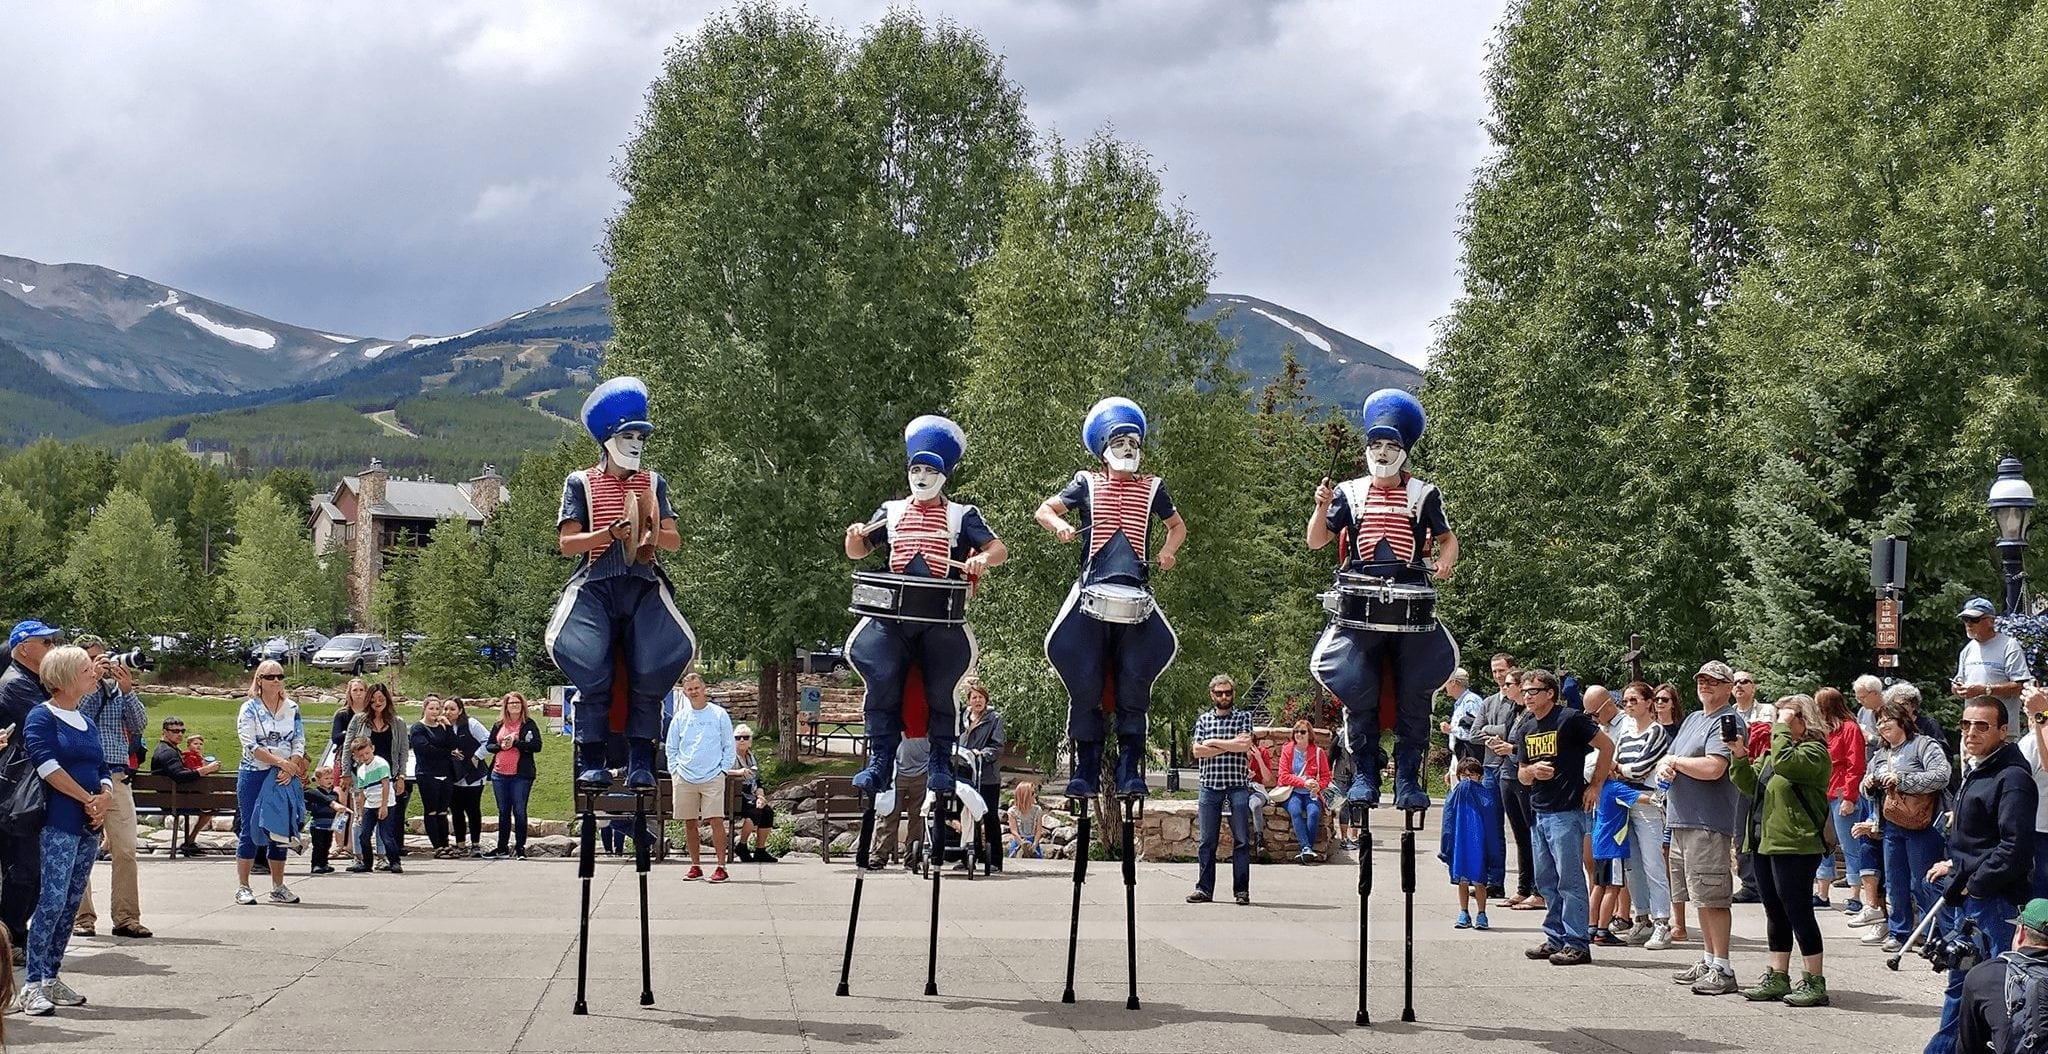 BCA Wave Festival Performance at Blue River Plaza during one of the Breckenridge Summer Events